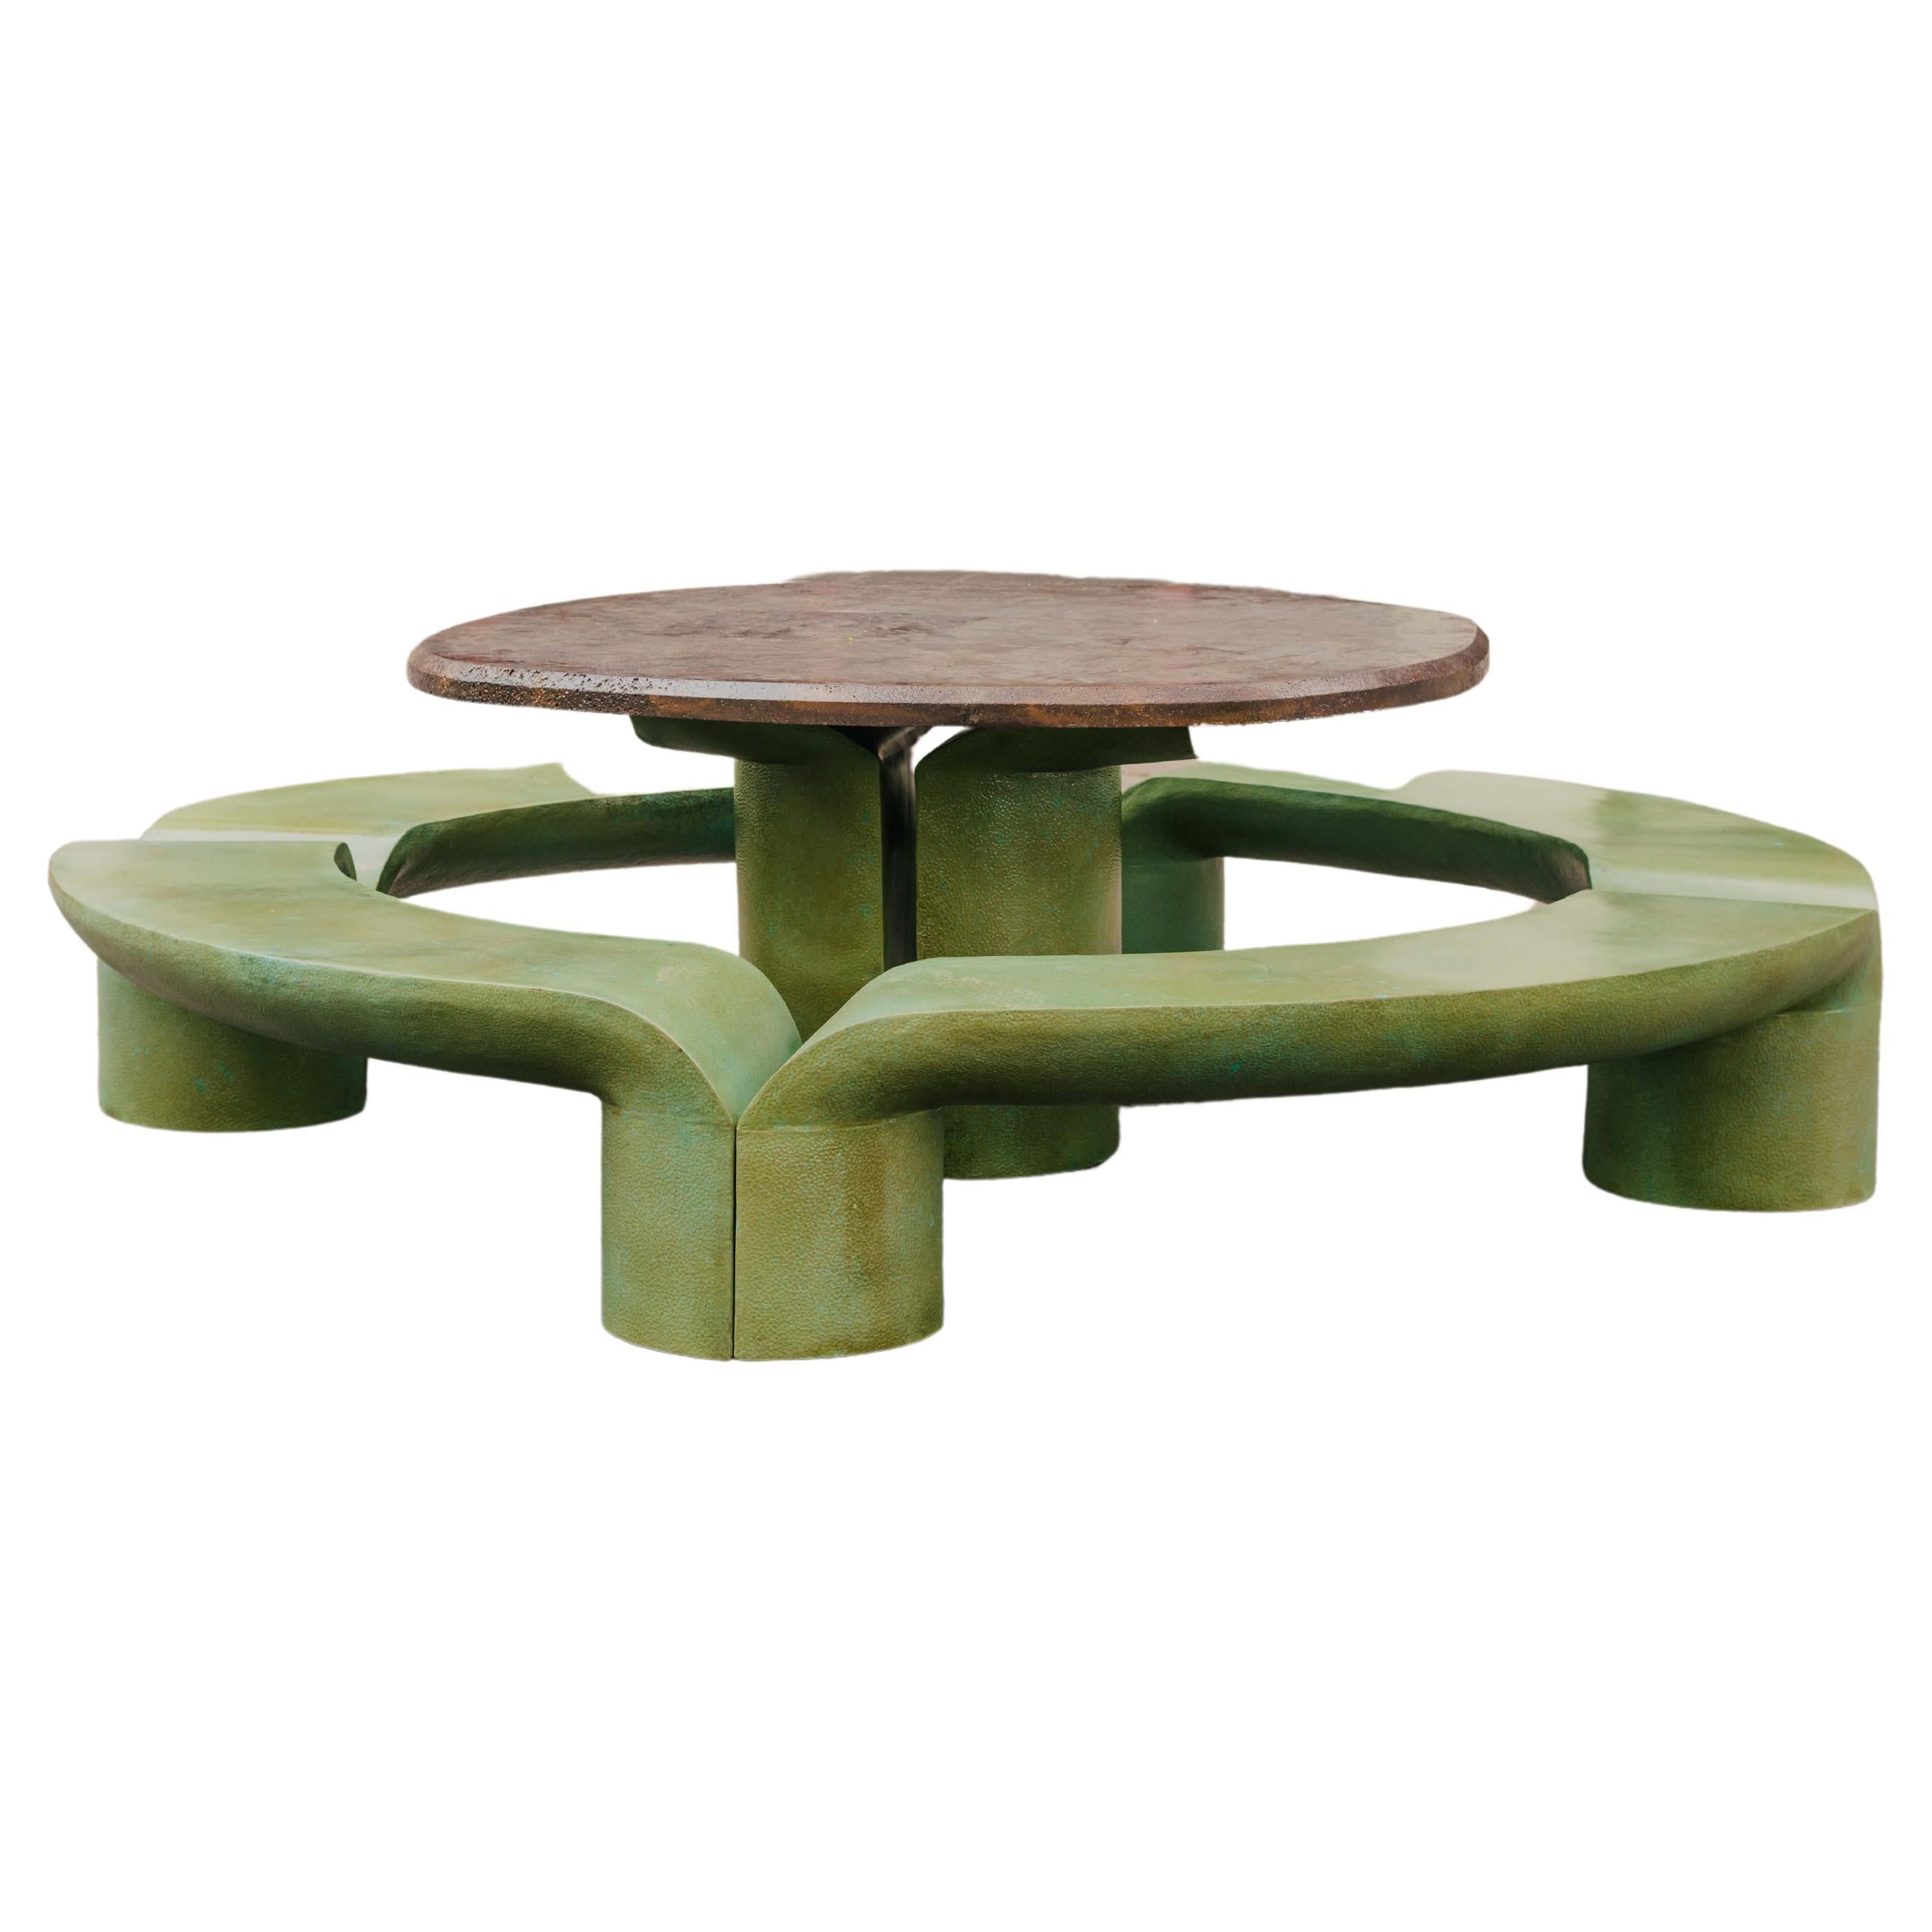 Oxidized Copper and Lava Stone Amaru Outdoor Table and Bench Set by Ian Felton For Sale